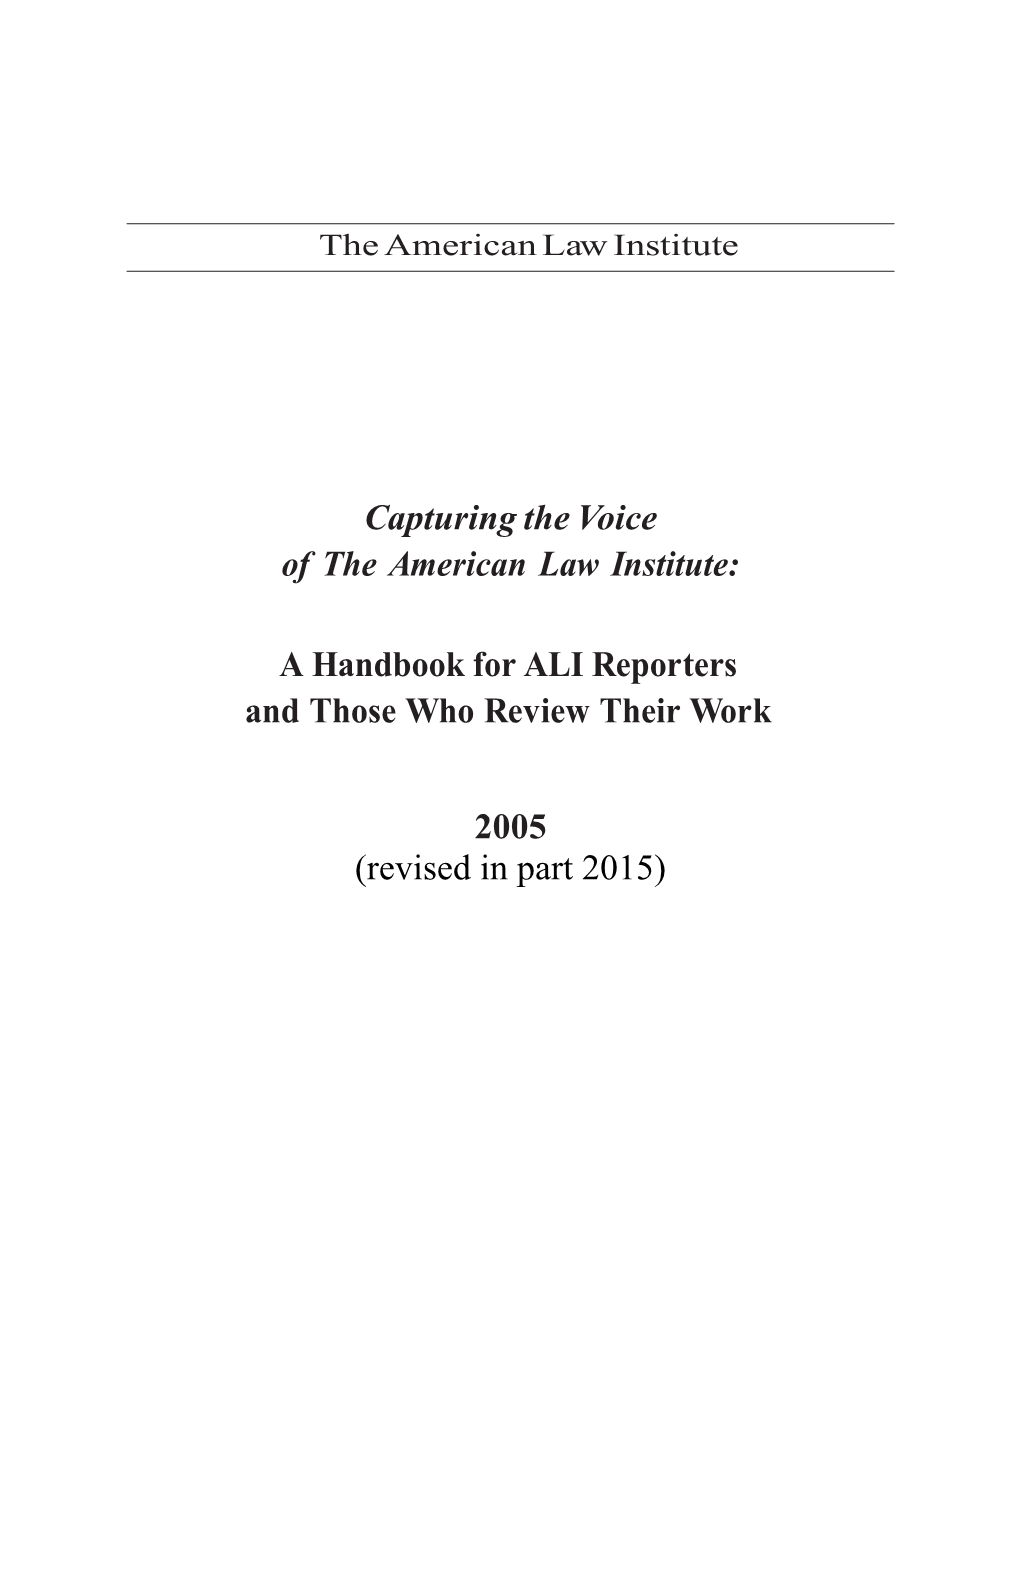 Capturing the Voice of the American Law Institute: a Handbook for ALI